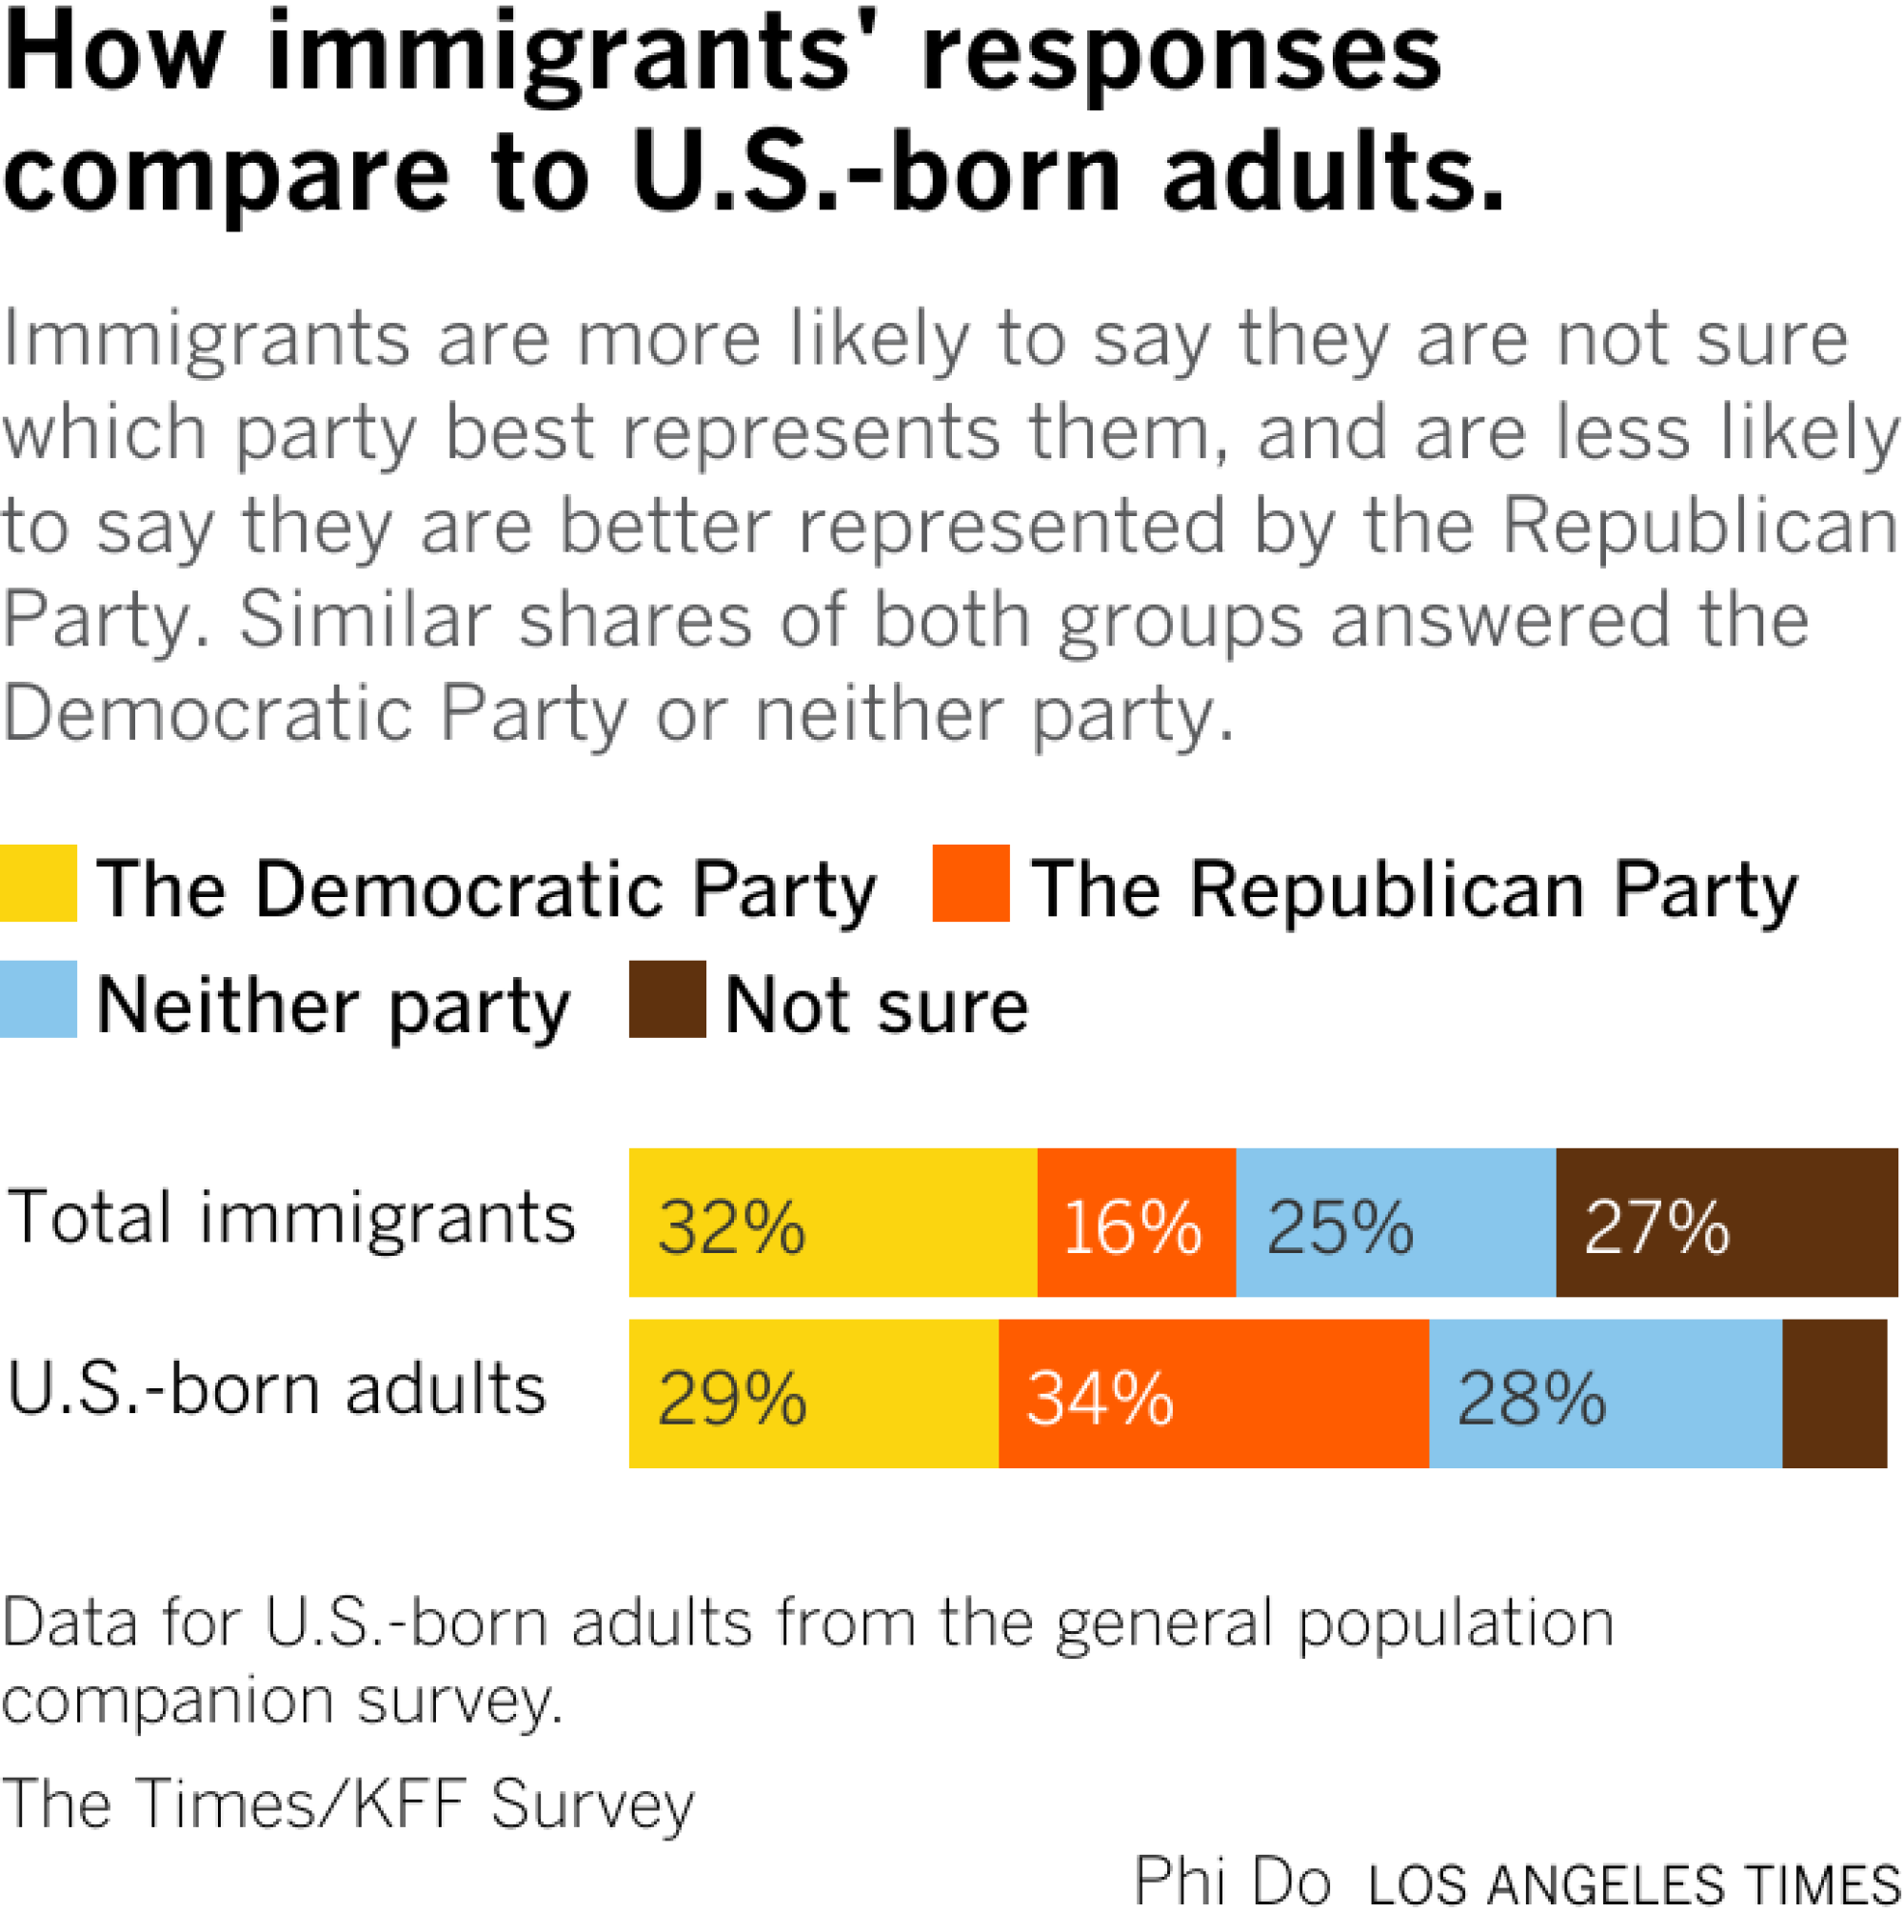 Horizontal stacked bar chart showing how immigrants' responses to which party best represents them compares to responses from U.S.-born adults